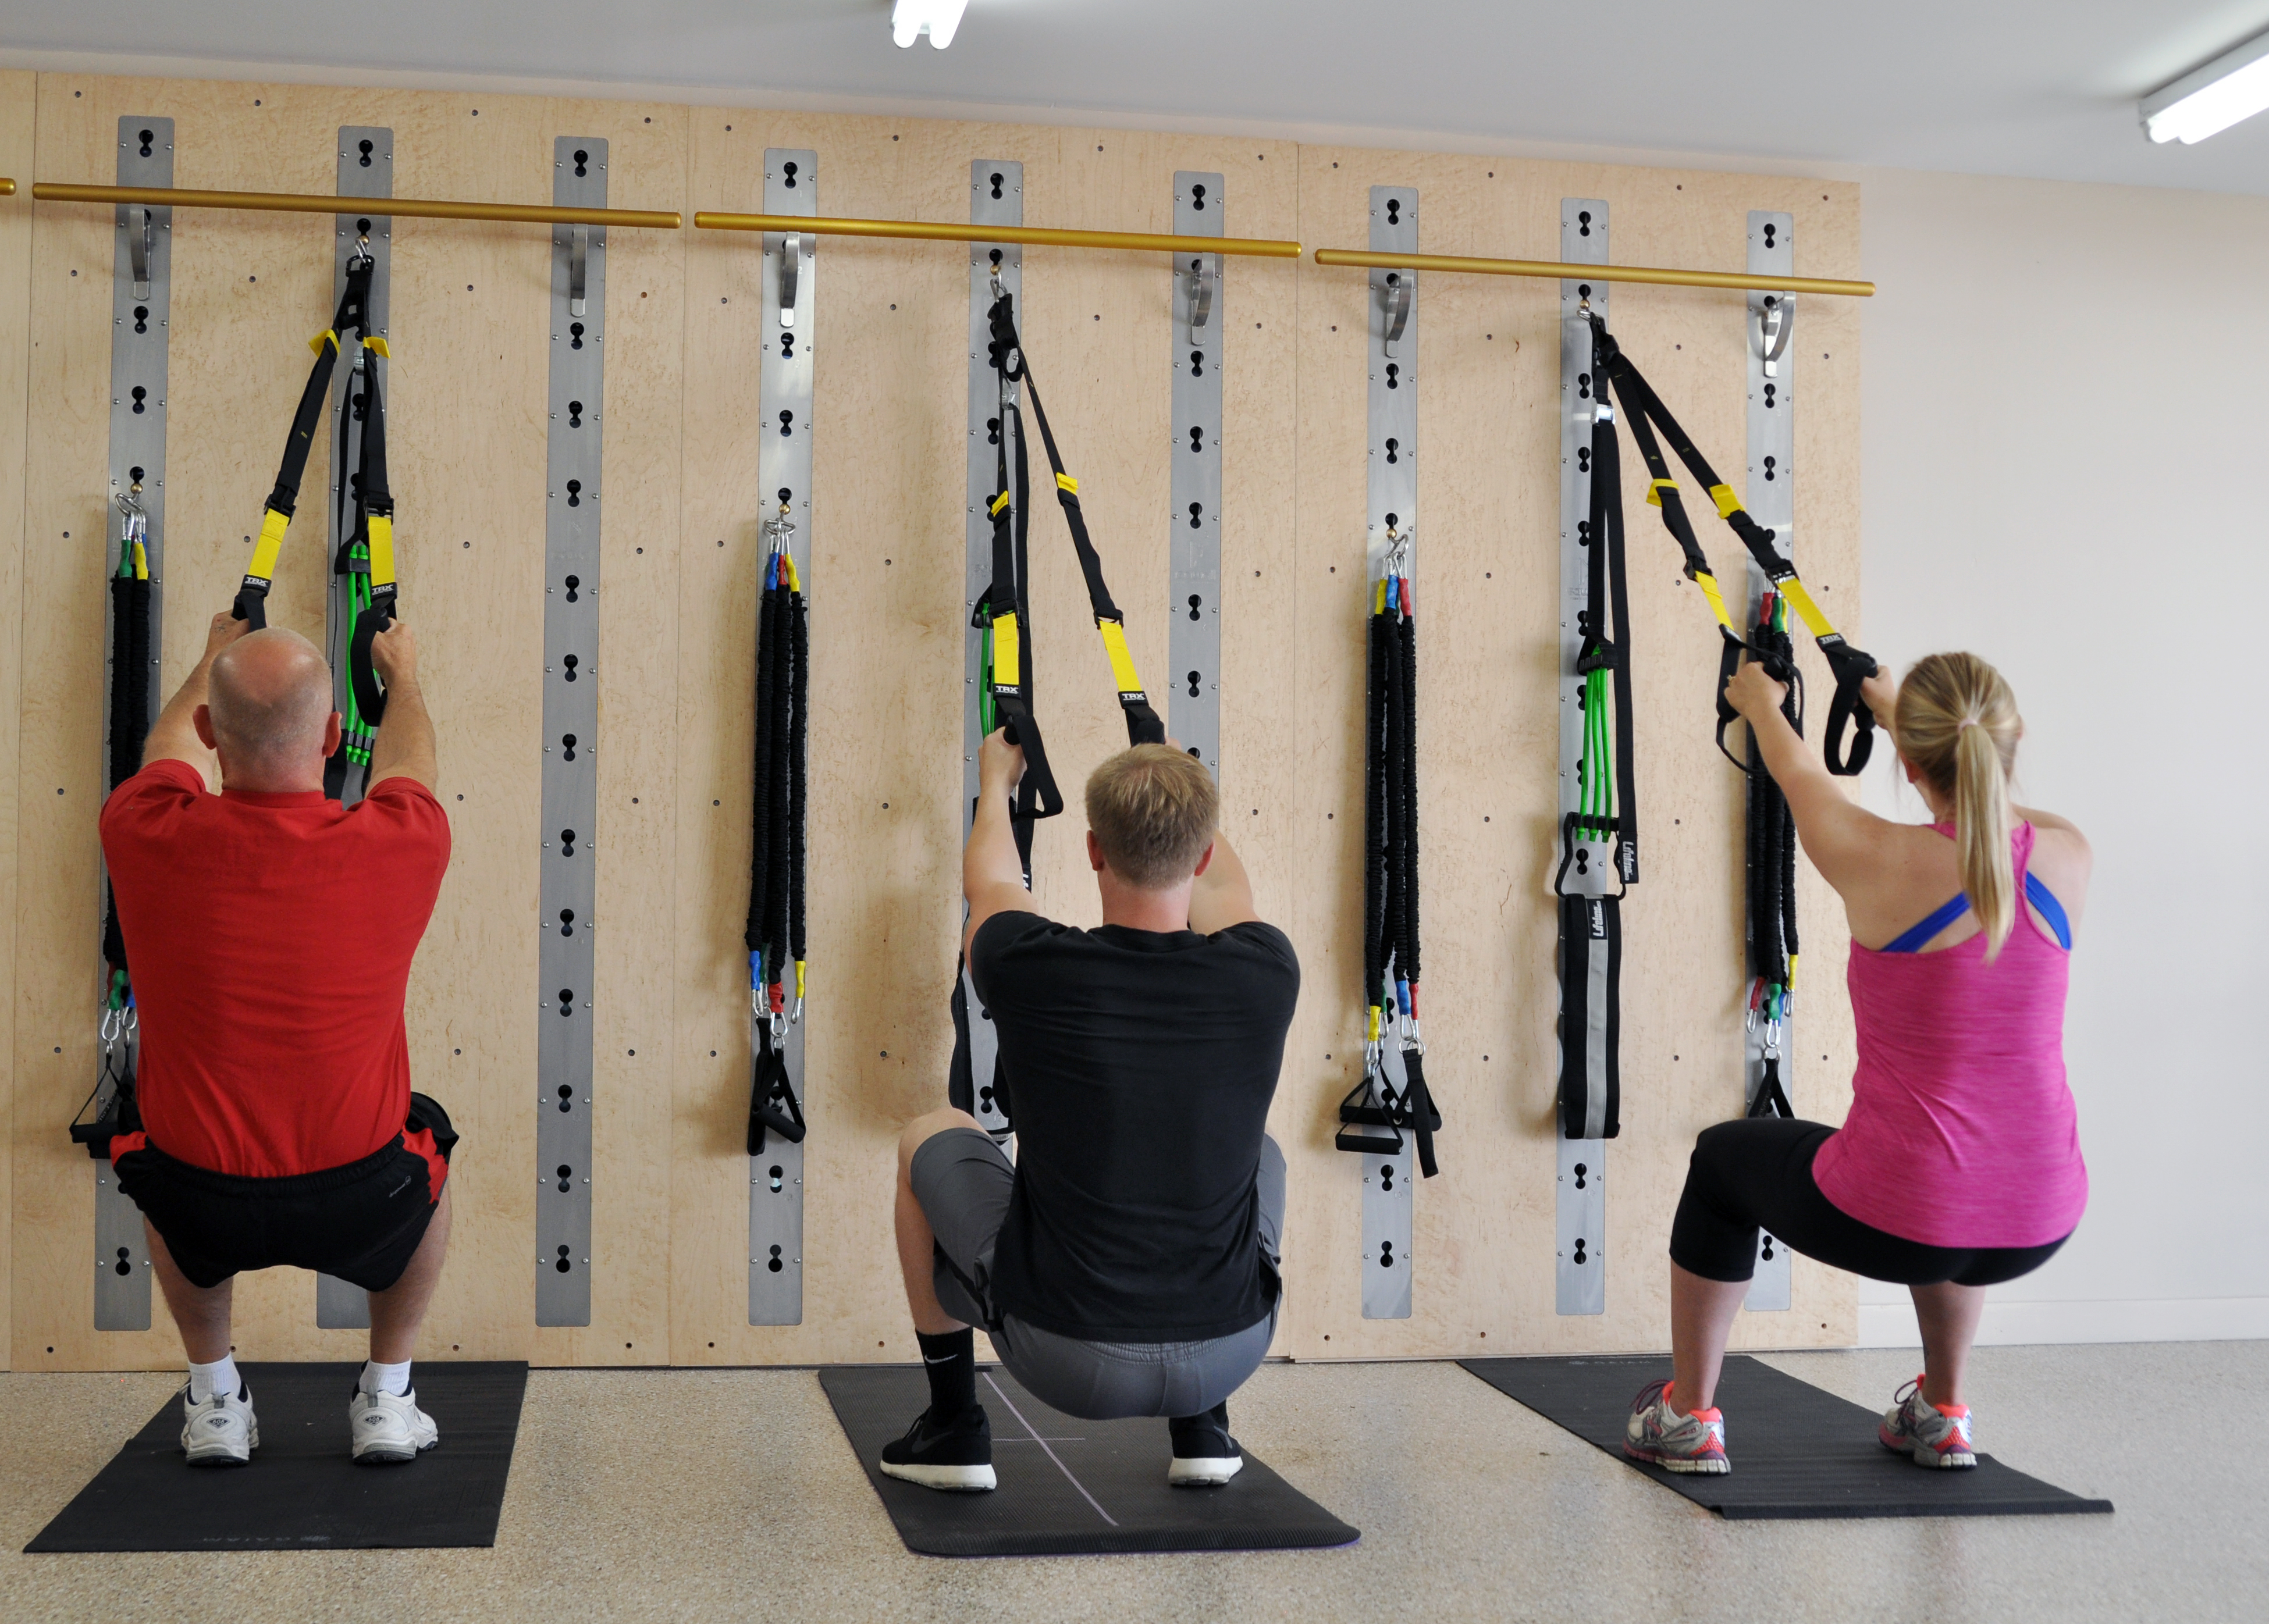 30 Minute Trx workout photos for push your ABS